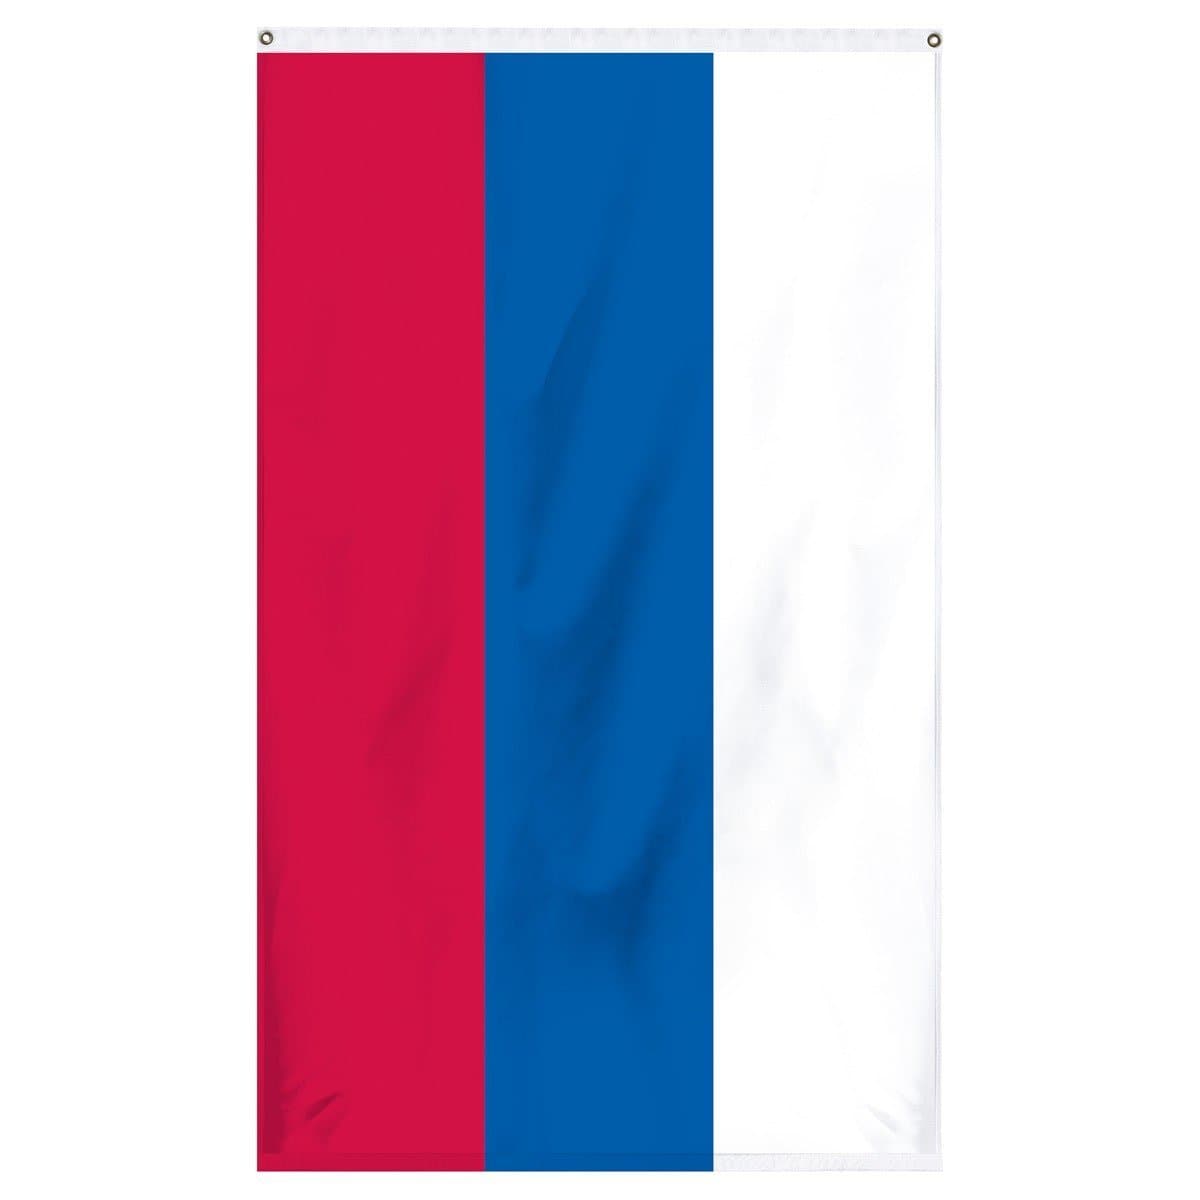 Russian national flag for sale to buy online now from an American company